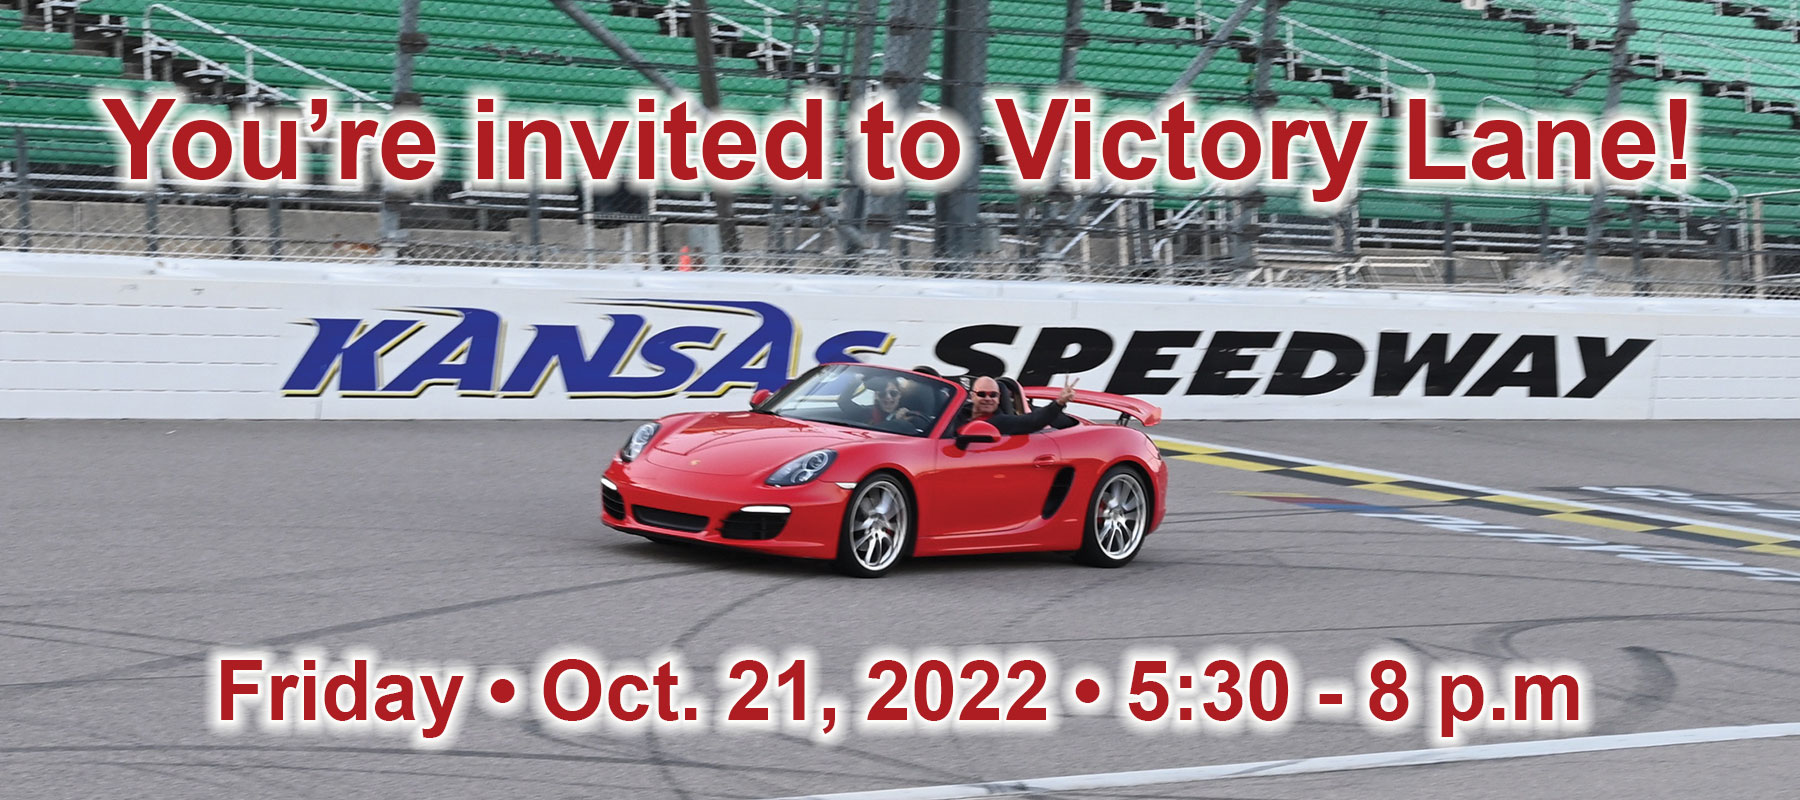 photo of civilian car driving on the Kansas Speedway track with text "You're invited to Victory Lane!" over the photo.